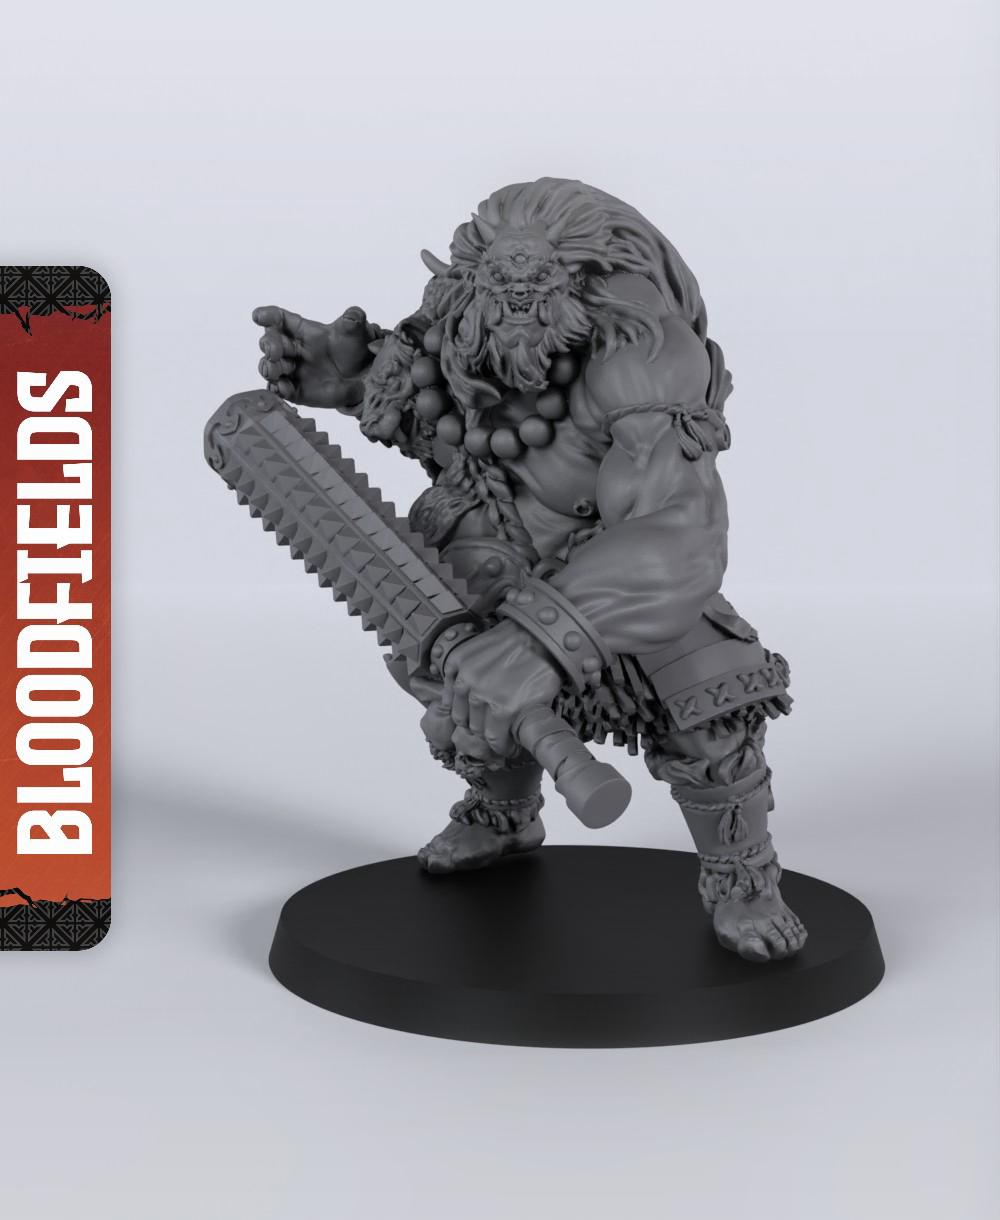 Oni - With Free Dragon Warhammer - 5e DnD Inspired for RPG and Wargamers 3d model